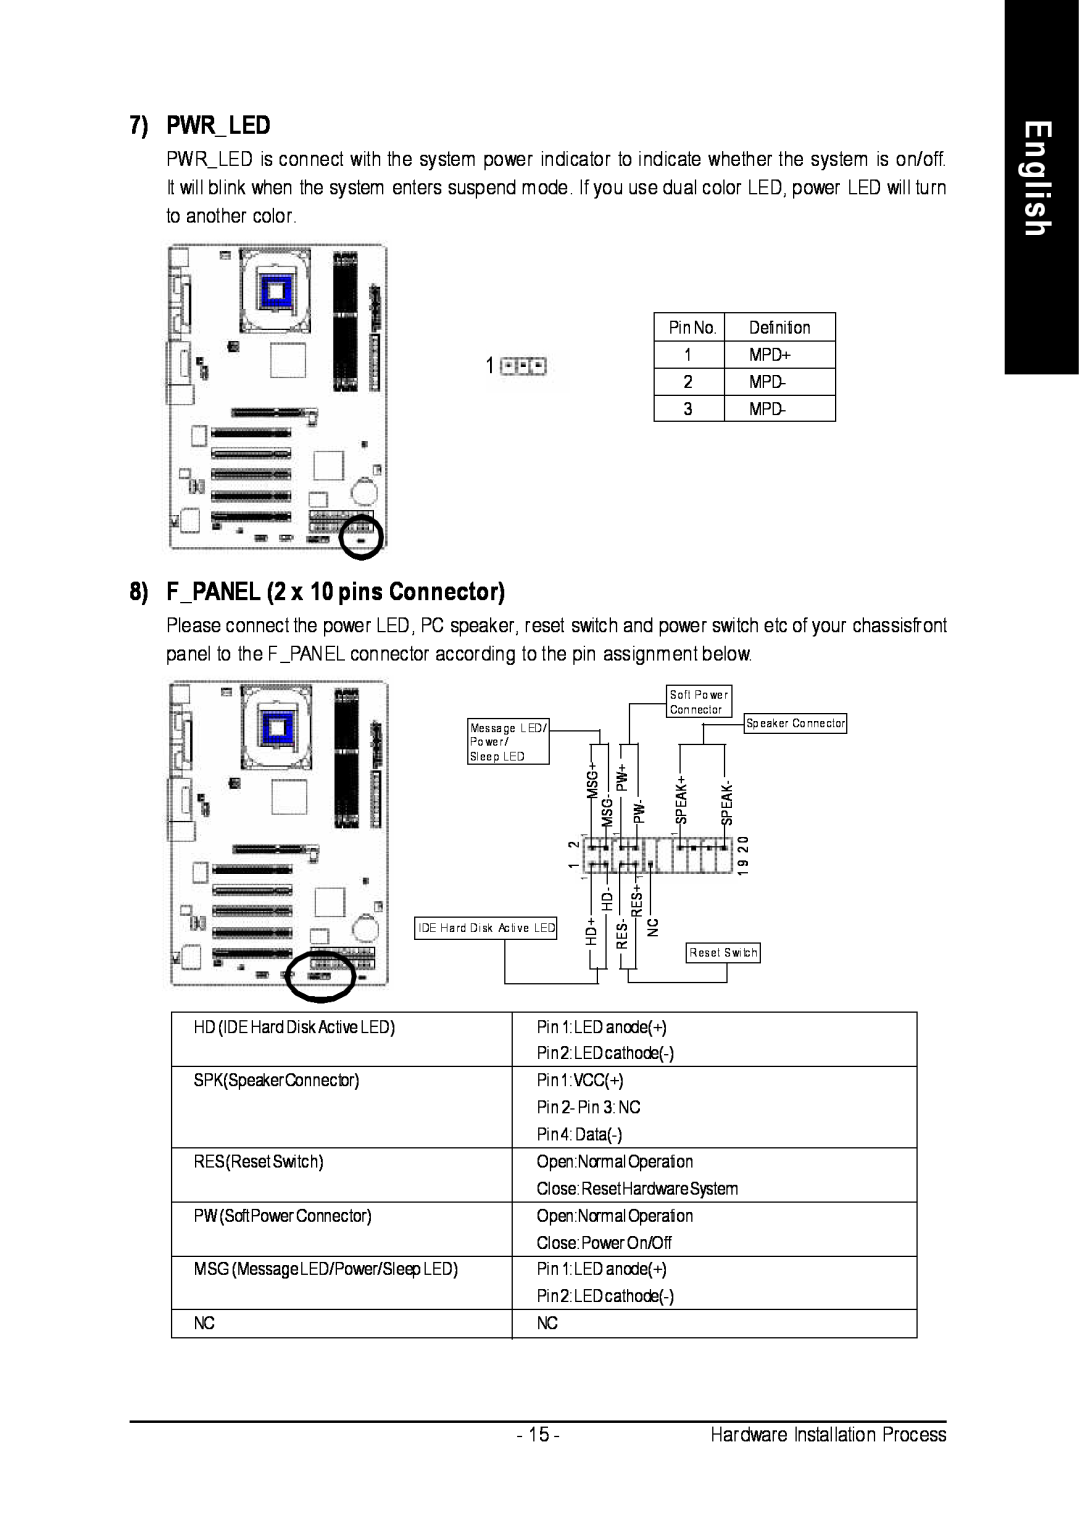 Intel 8I845PE-RZ-C user manual English, Pwrled, FPANEL 2 x 10 pins Connector 